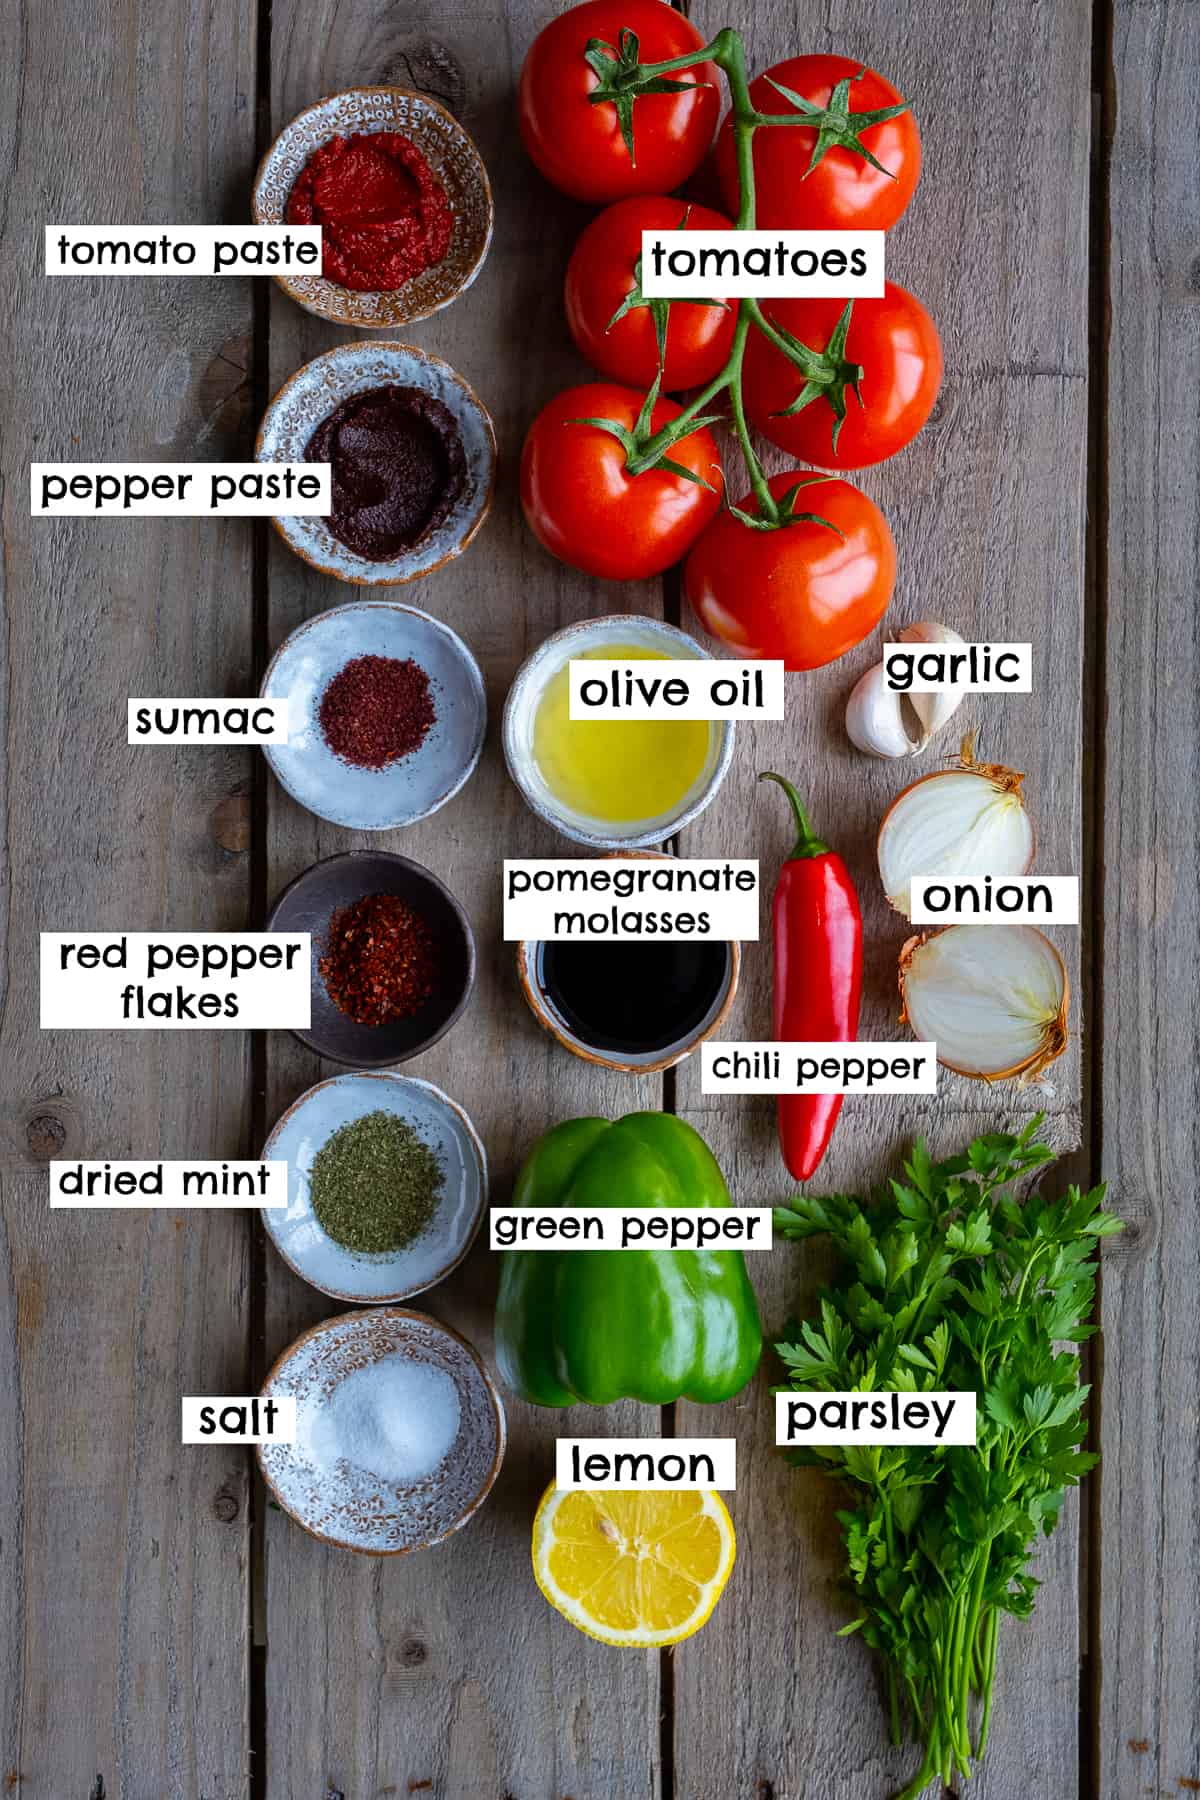 Spices, tomato paste, pepper paste, tomatoes, olive oil, lemon, parsley, red chili pepper, green bell pepper, halved onion, garlic cloves, pomegranate molasses on a wooden backdrop.